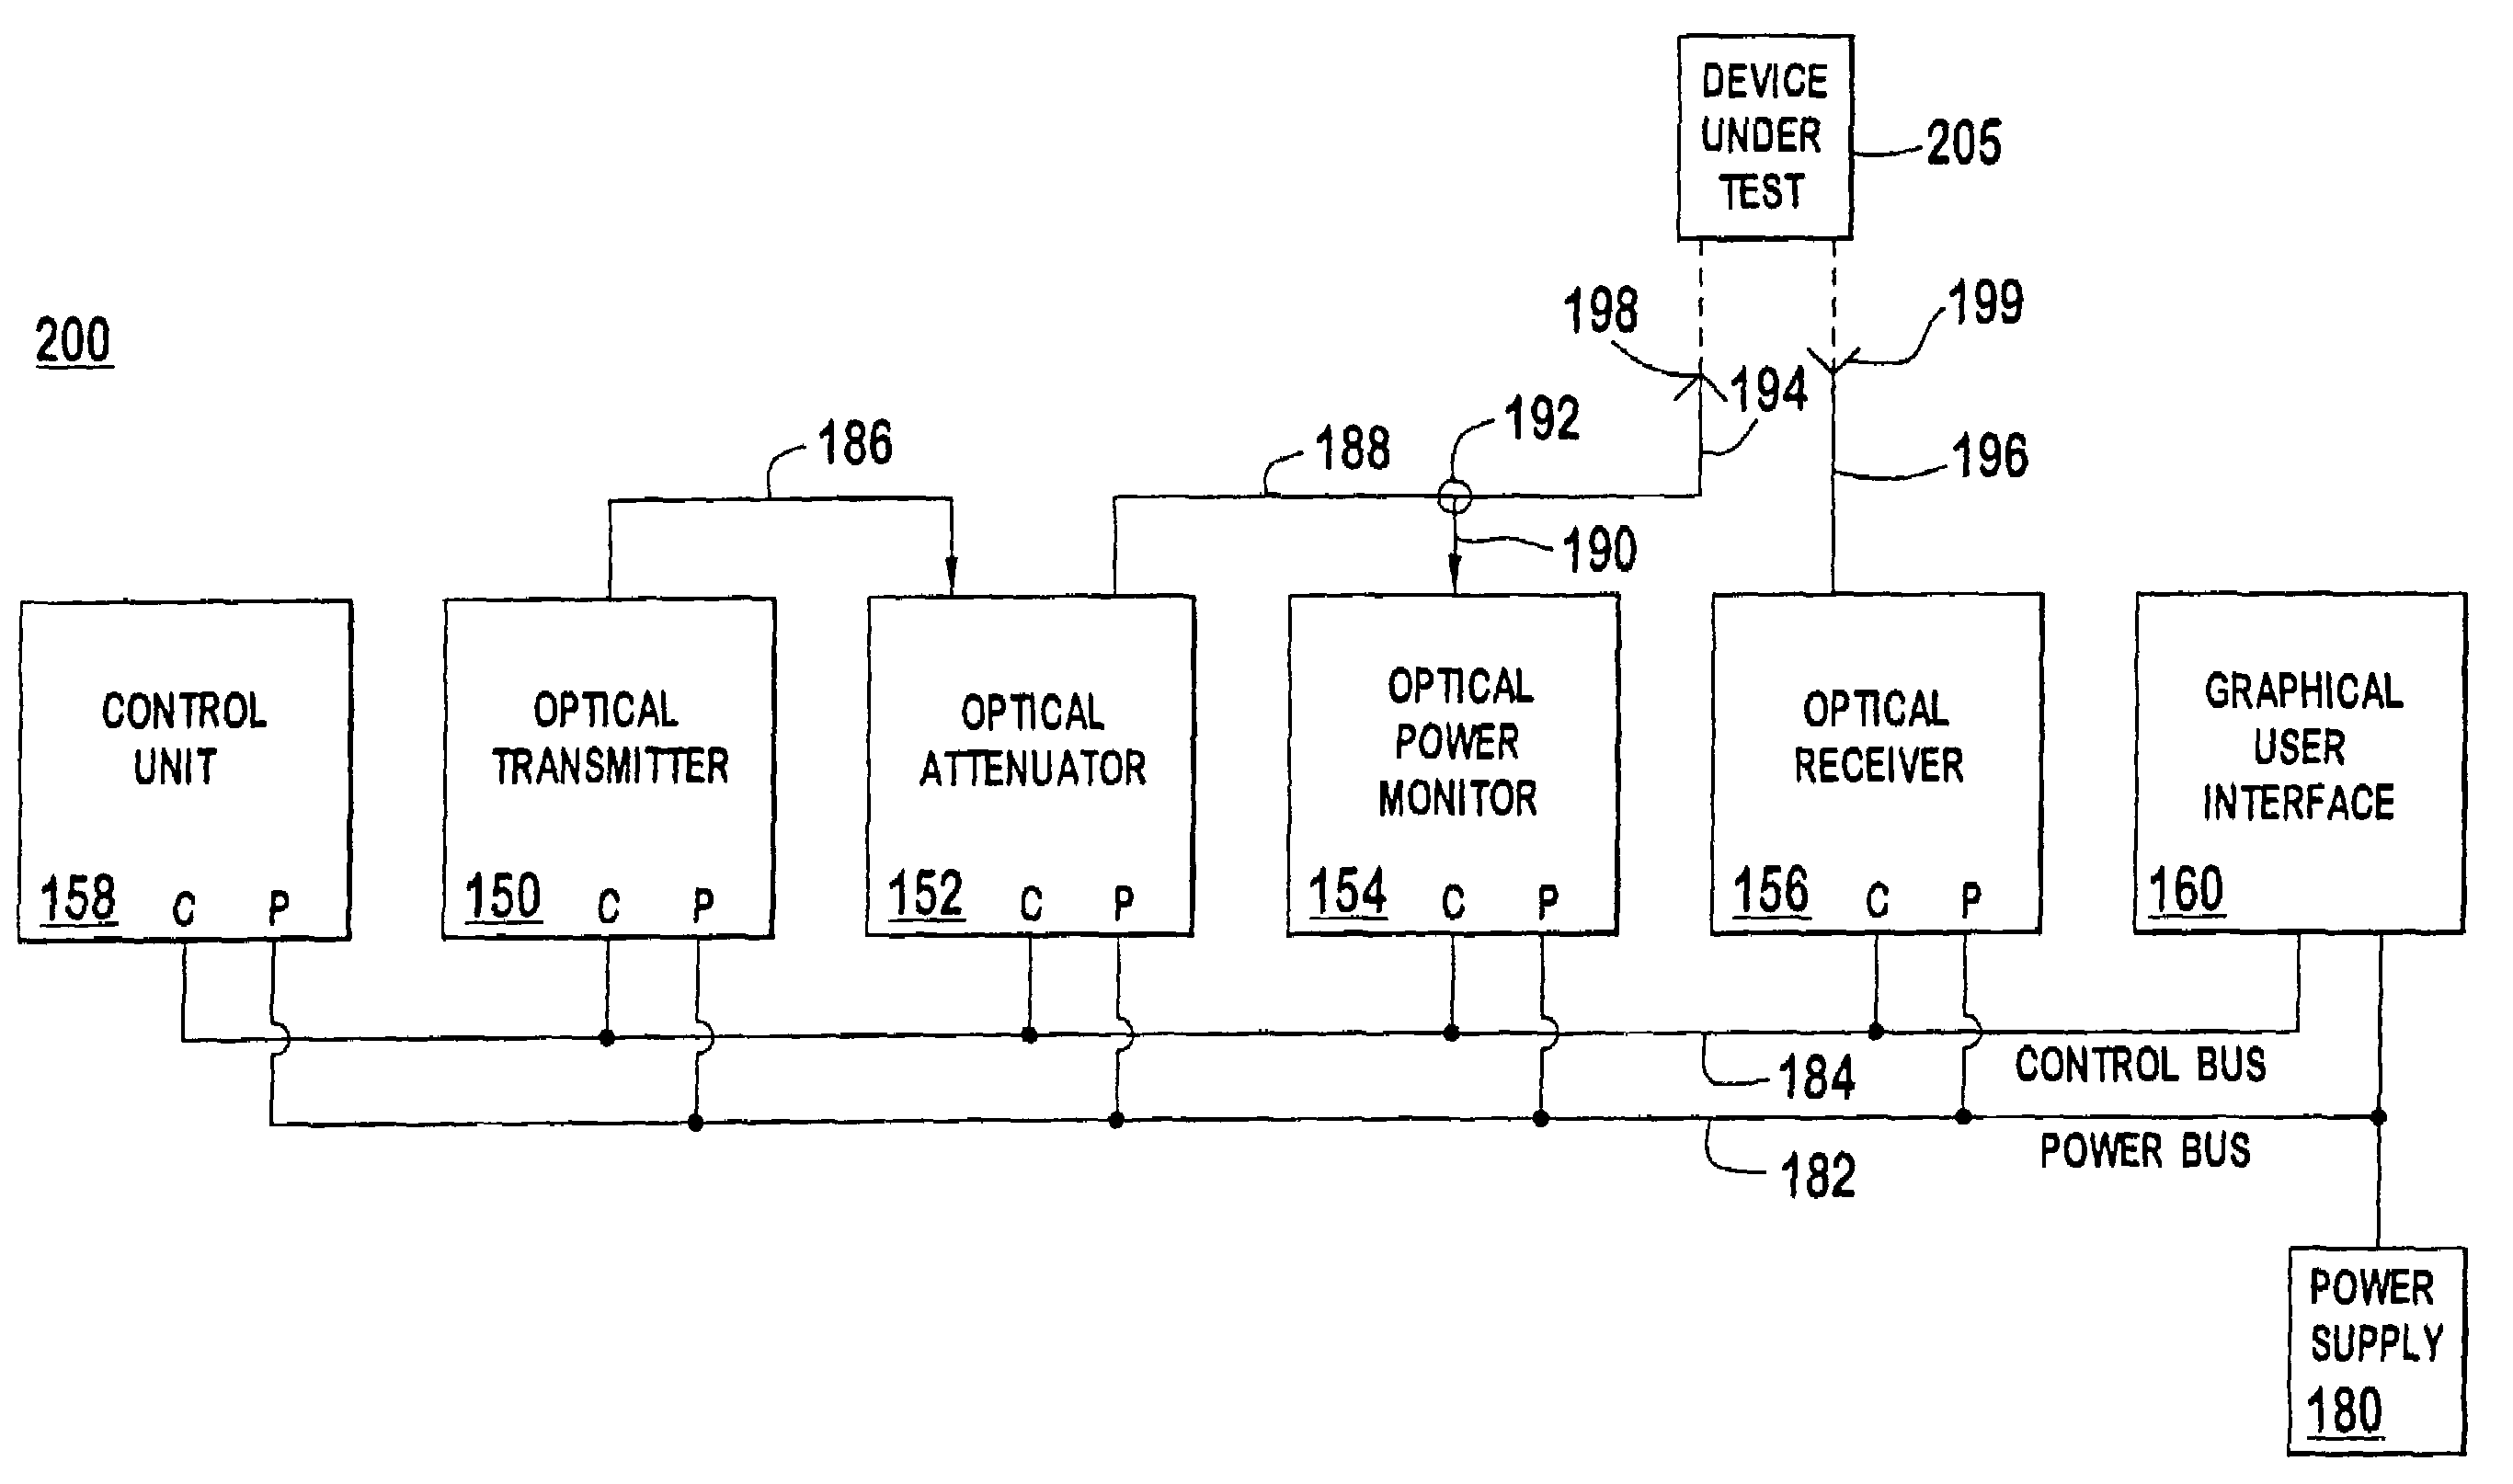 Unitary testing apparatus for performing bit error rate measurements on optical components